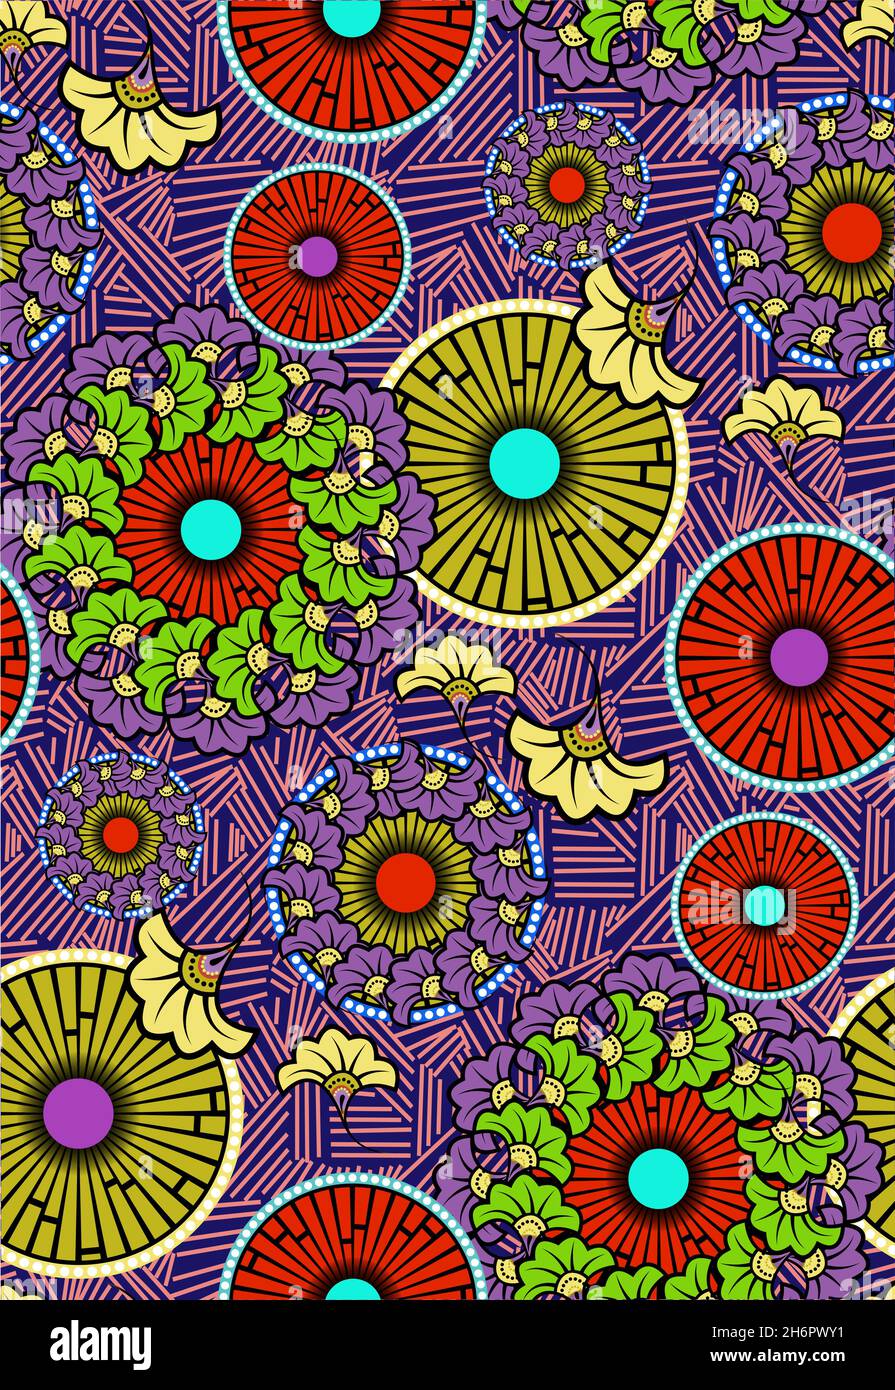 Seamless African Wax Print fabric, Ethnic handmade ornament fashion design, Afro Ethnic flowers and tribal motifs geometric elements. Vector colorful Stock Vector